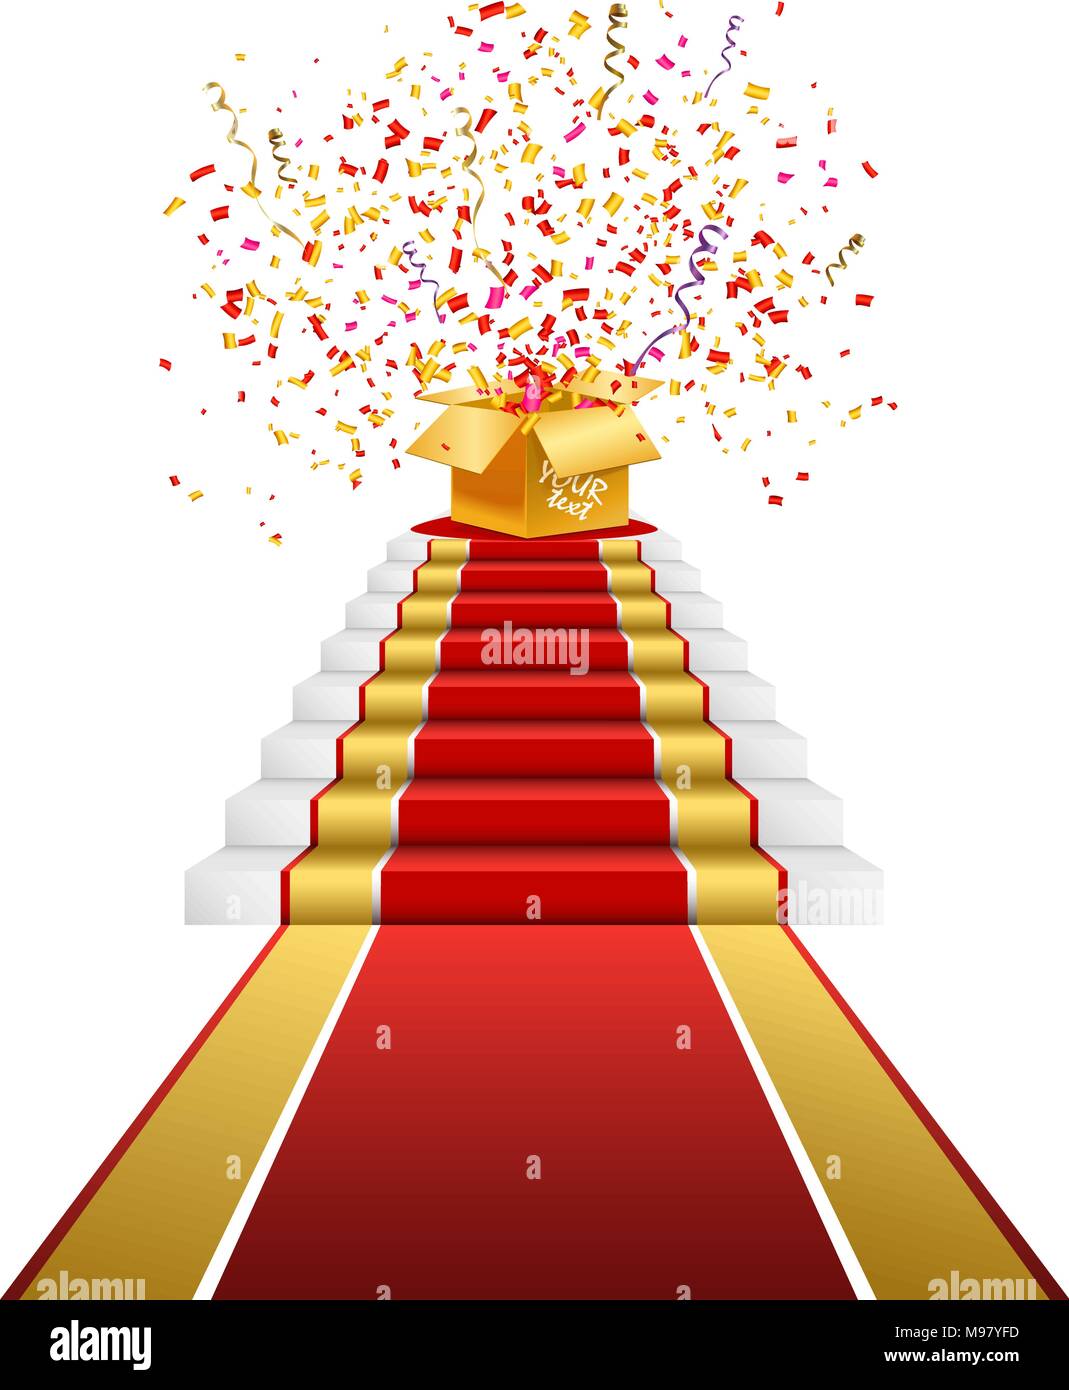 Staircase with red carpet. Prize, gift boxes. Realistic illustration Stock Vector